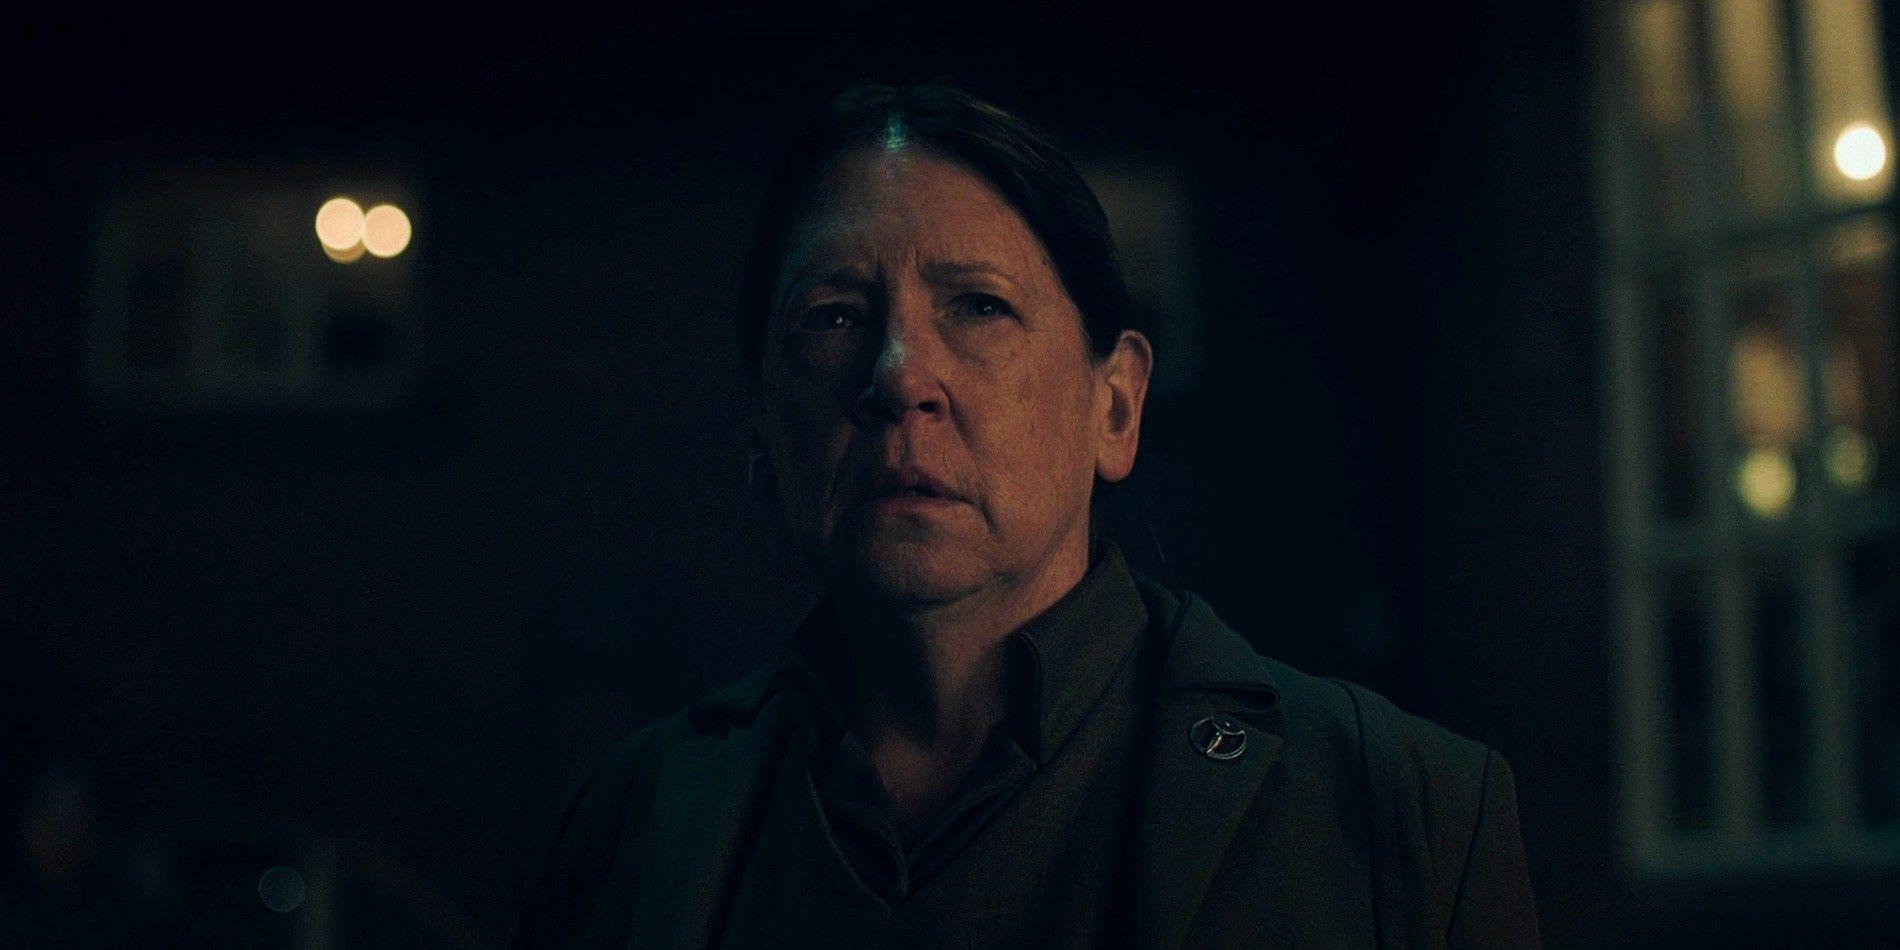 Ann Dowd as Aunt Lydia in The Handmaid's Tale season 5 episode 10.